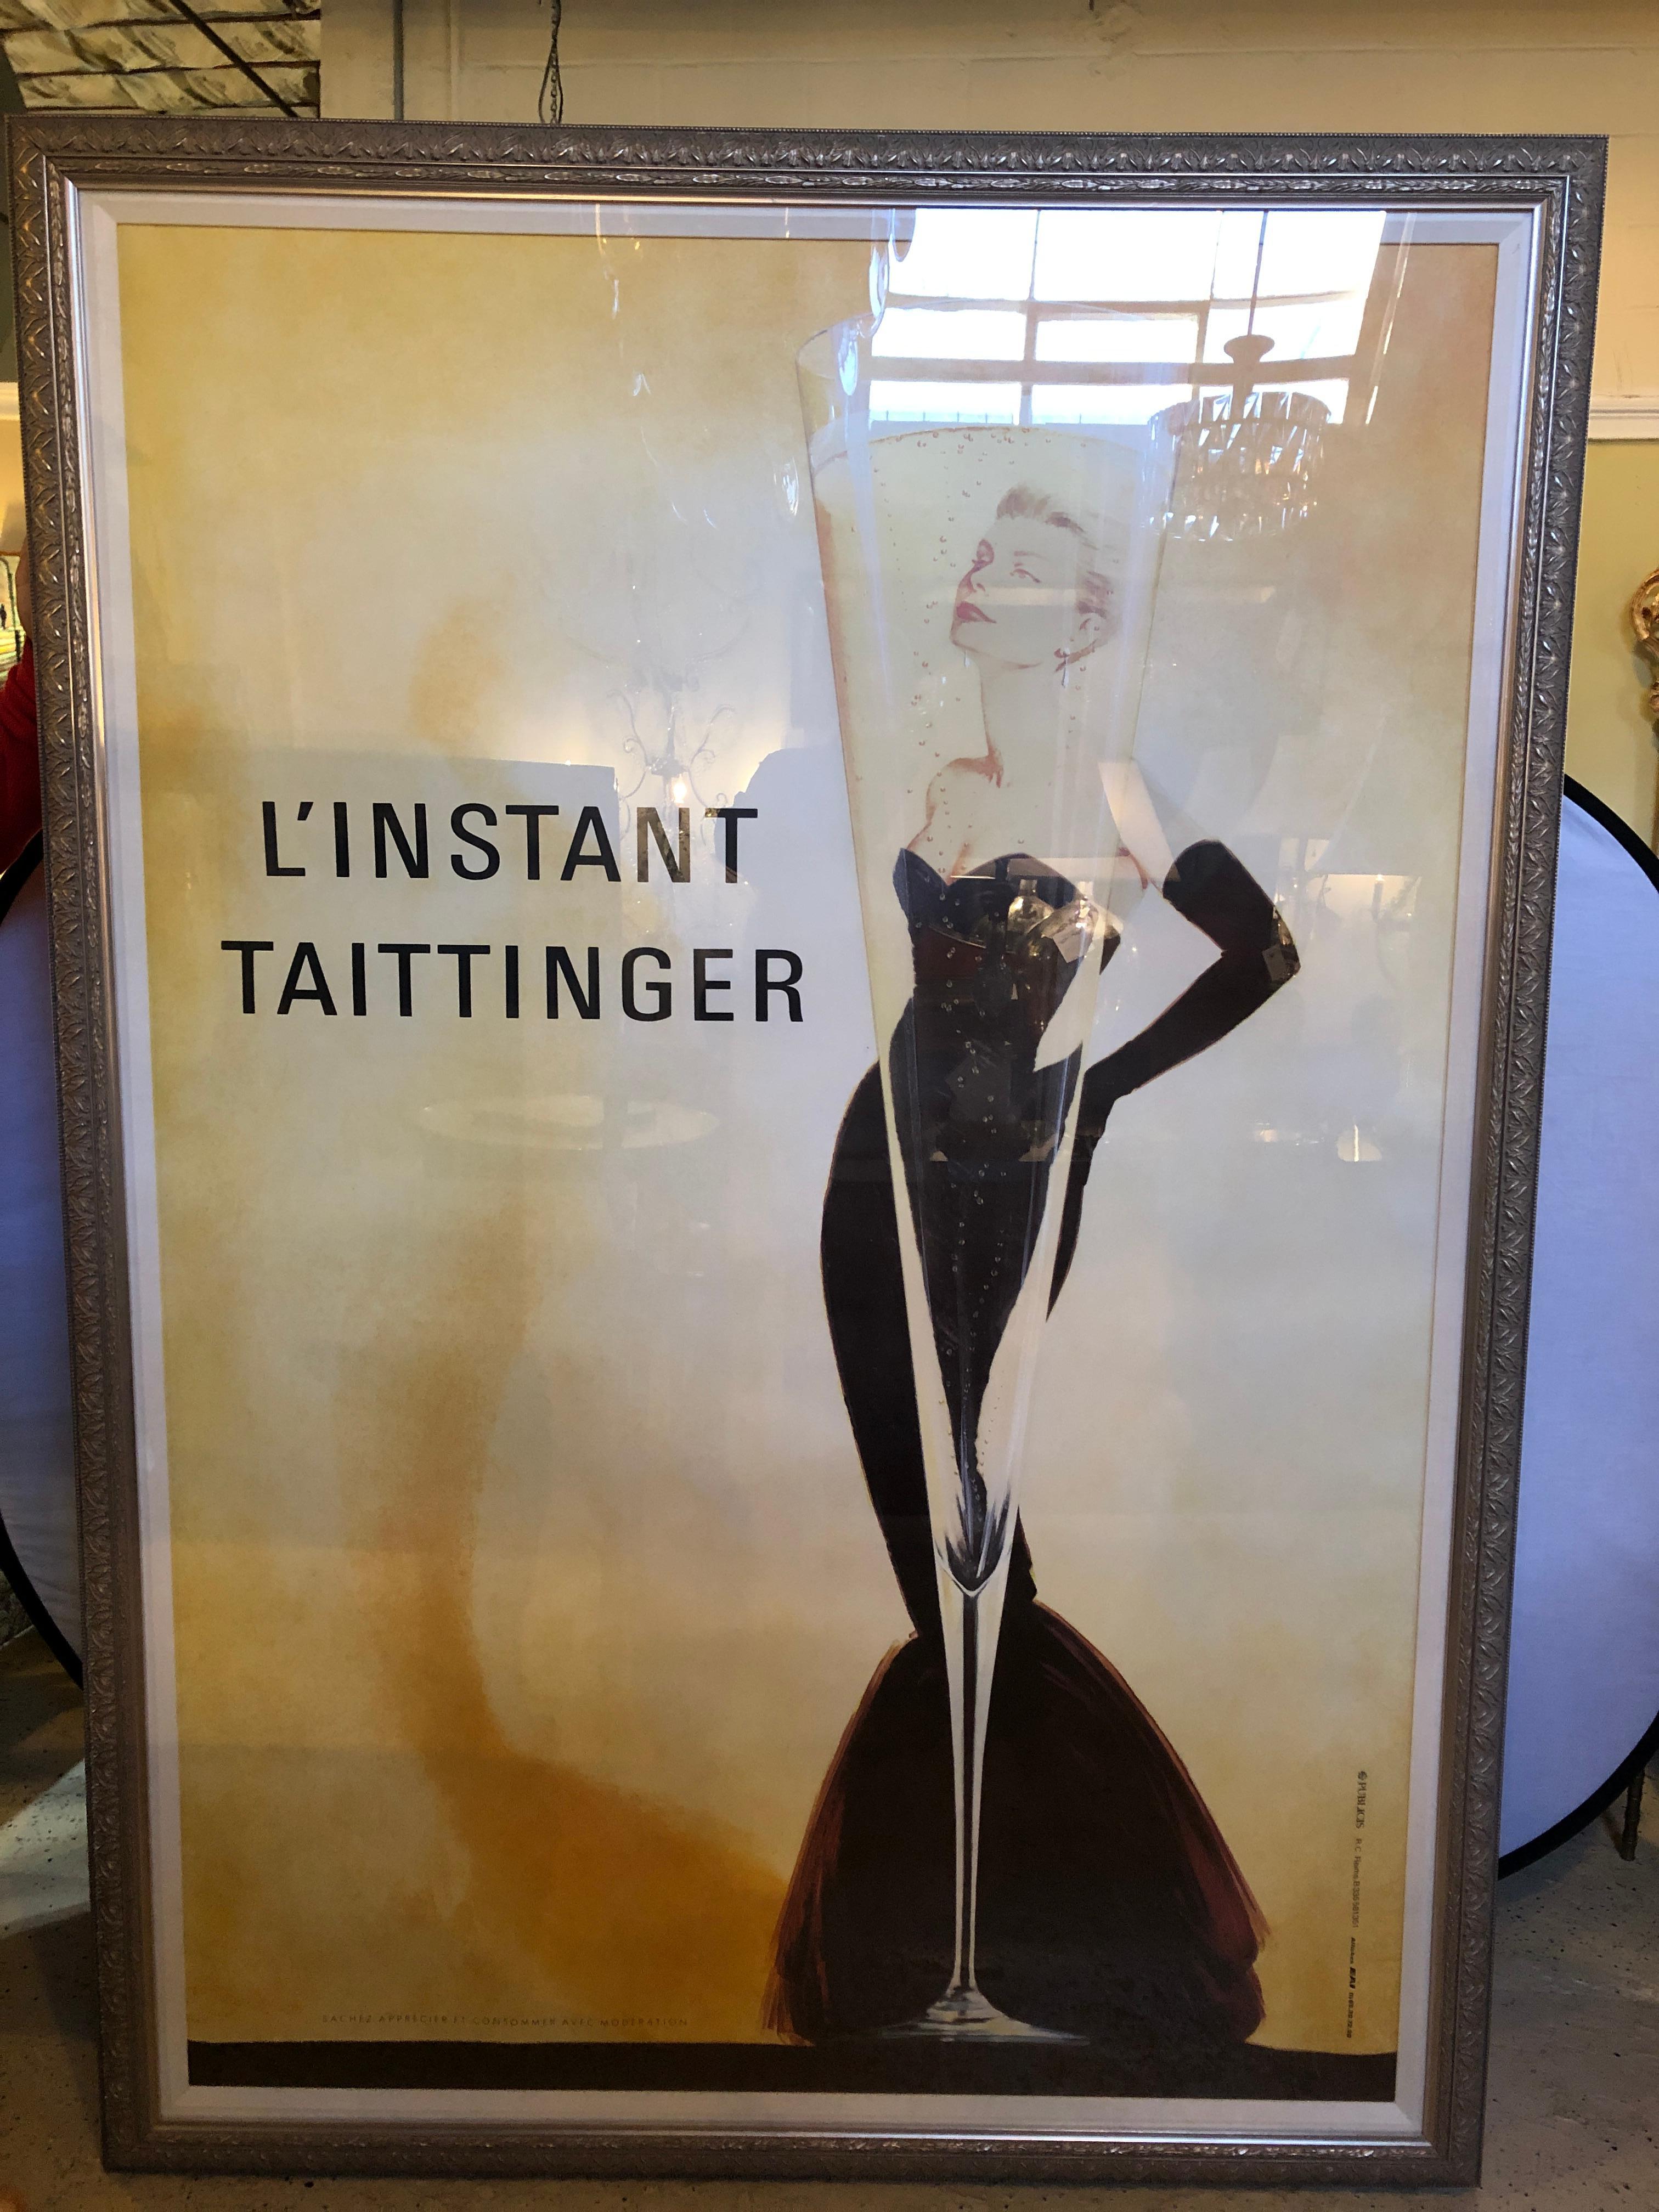 Large and impressive L'Instant Taittinger authentic vintage poster by Publicic Conseil

The L’Instant Taittinger poster often gets mistaken for being an older poster than it actually is. Printed in 1989, Taittinger advertisers were aiming for a